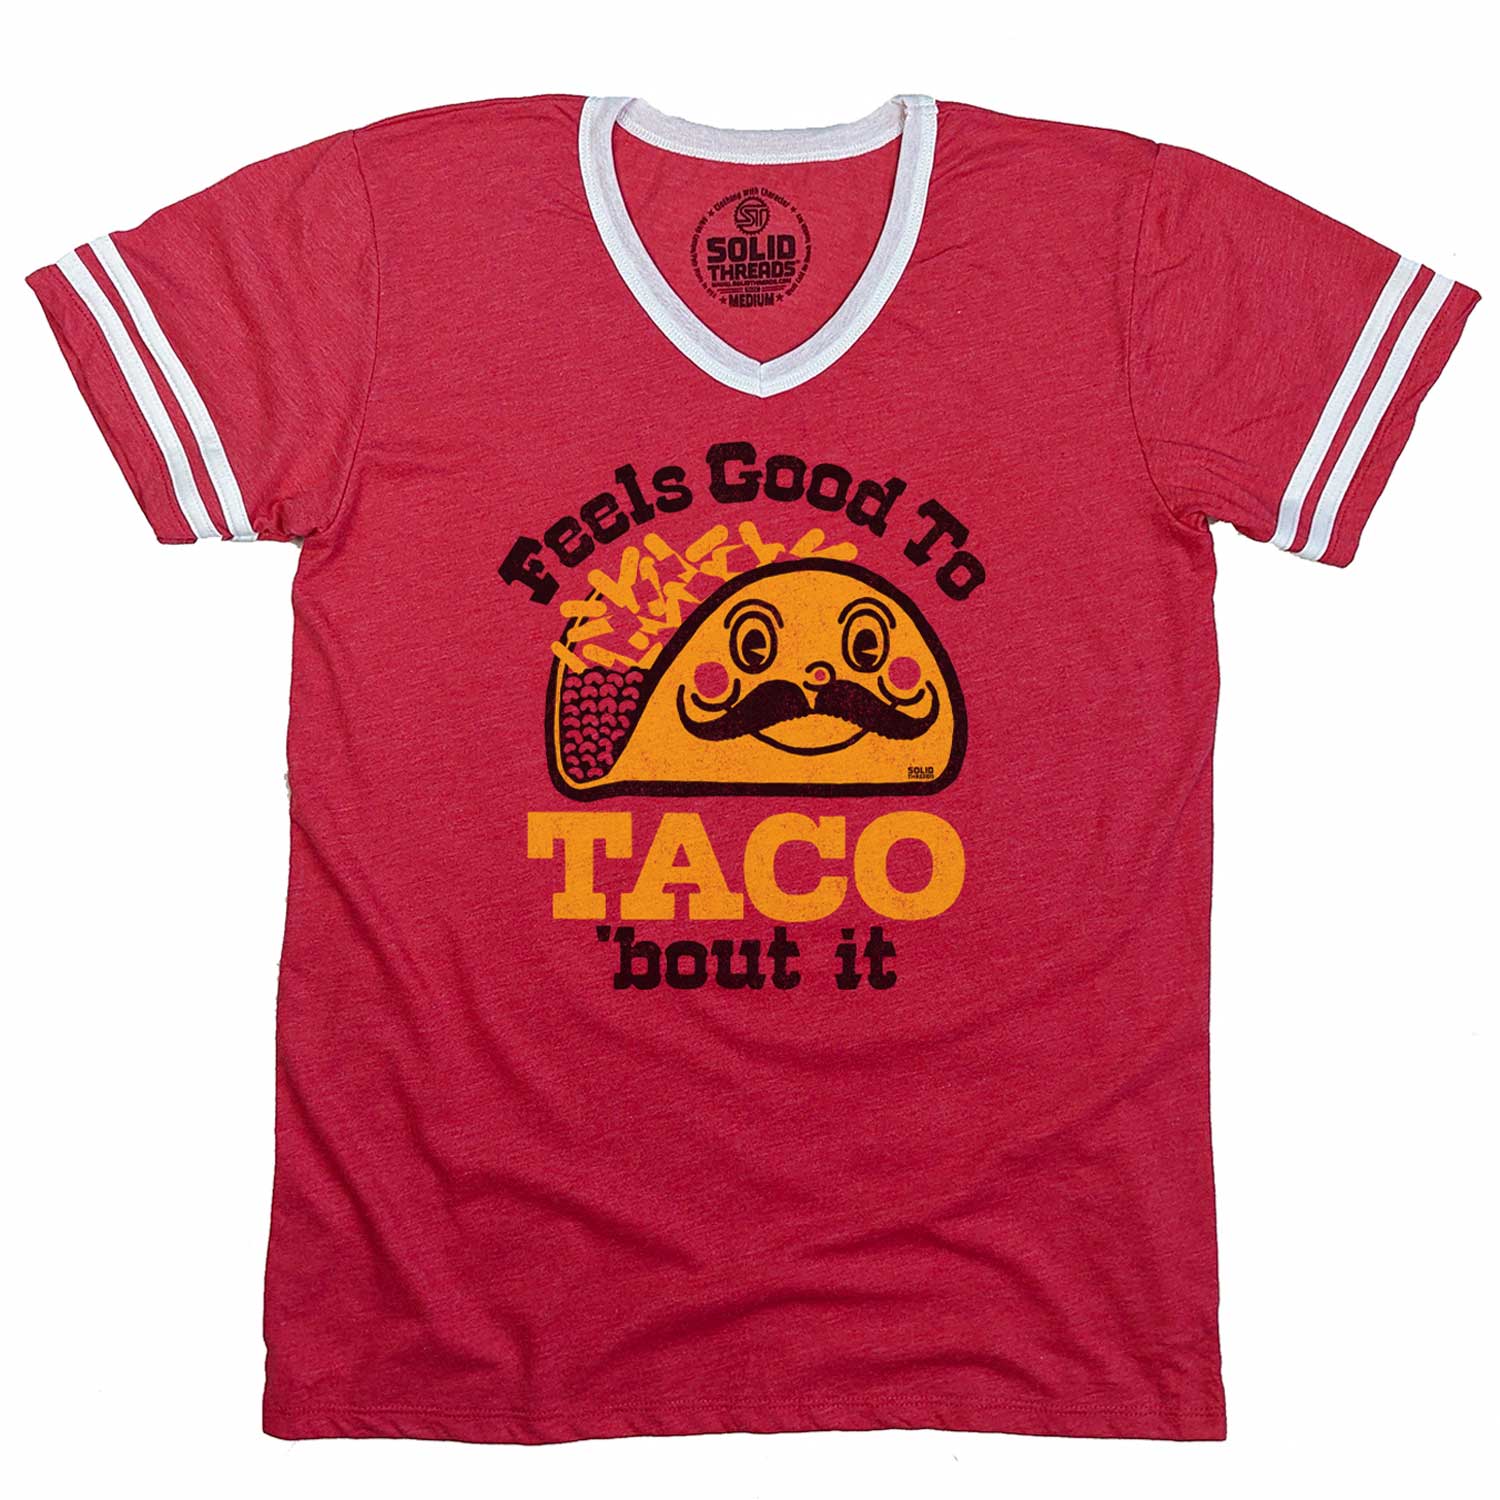 Men's Feels Good To Taco Bout It Graphic V-Neck Tee | Funny Mexican Food T-Shirt | Solid Threads